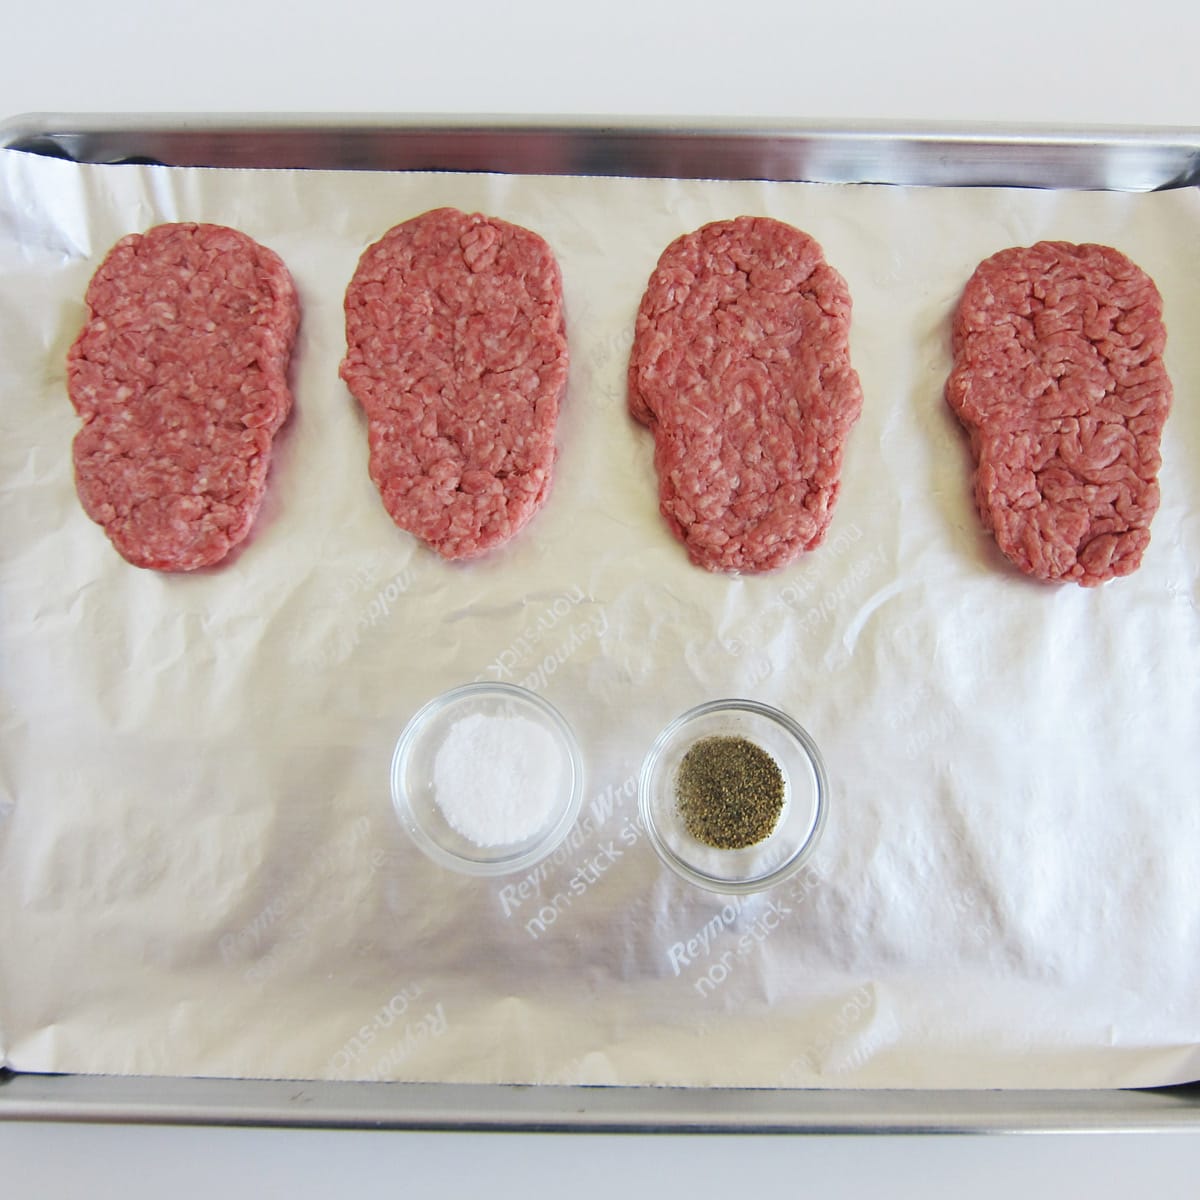 uncooked skull-shaped hamburger patties on a tin foil-lined baking tray with salt and pepper.